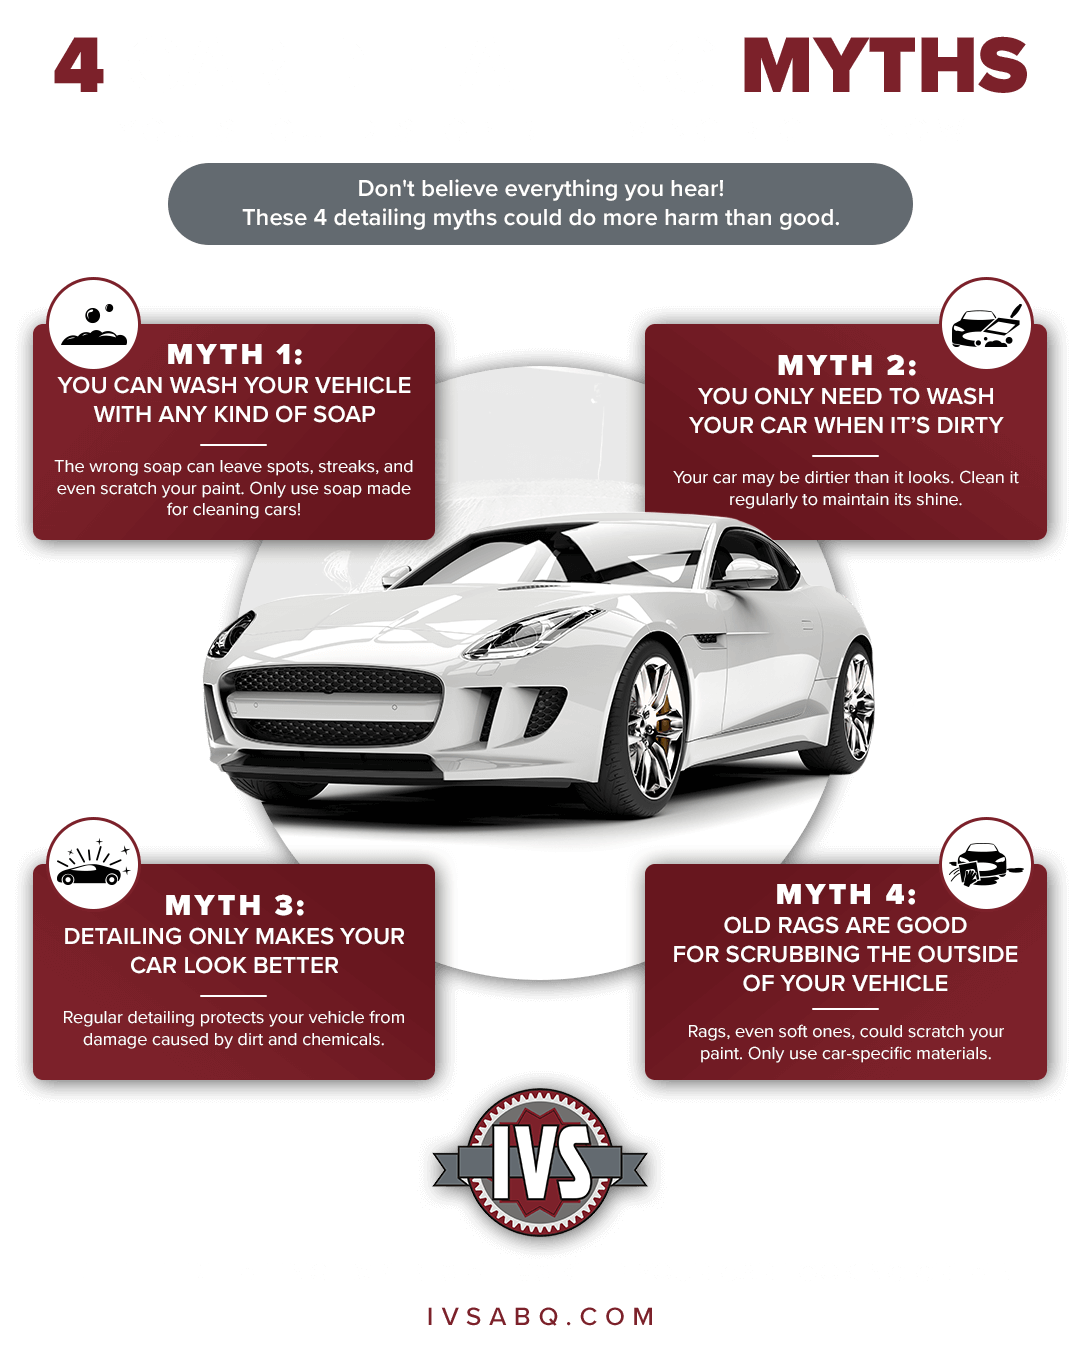 4 Car Detailing Myths infographic.png